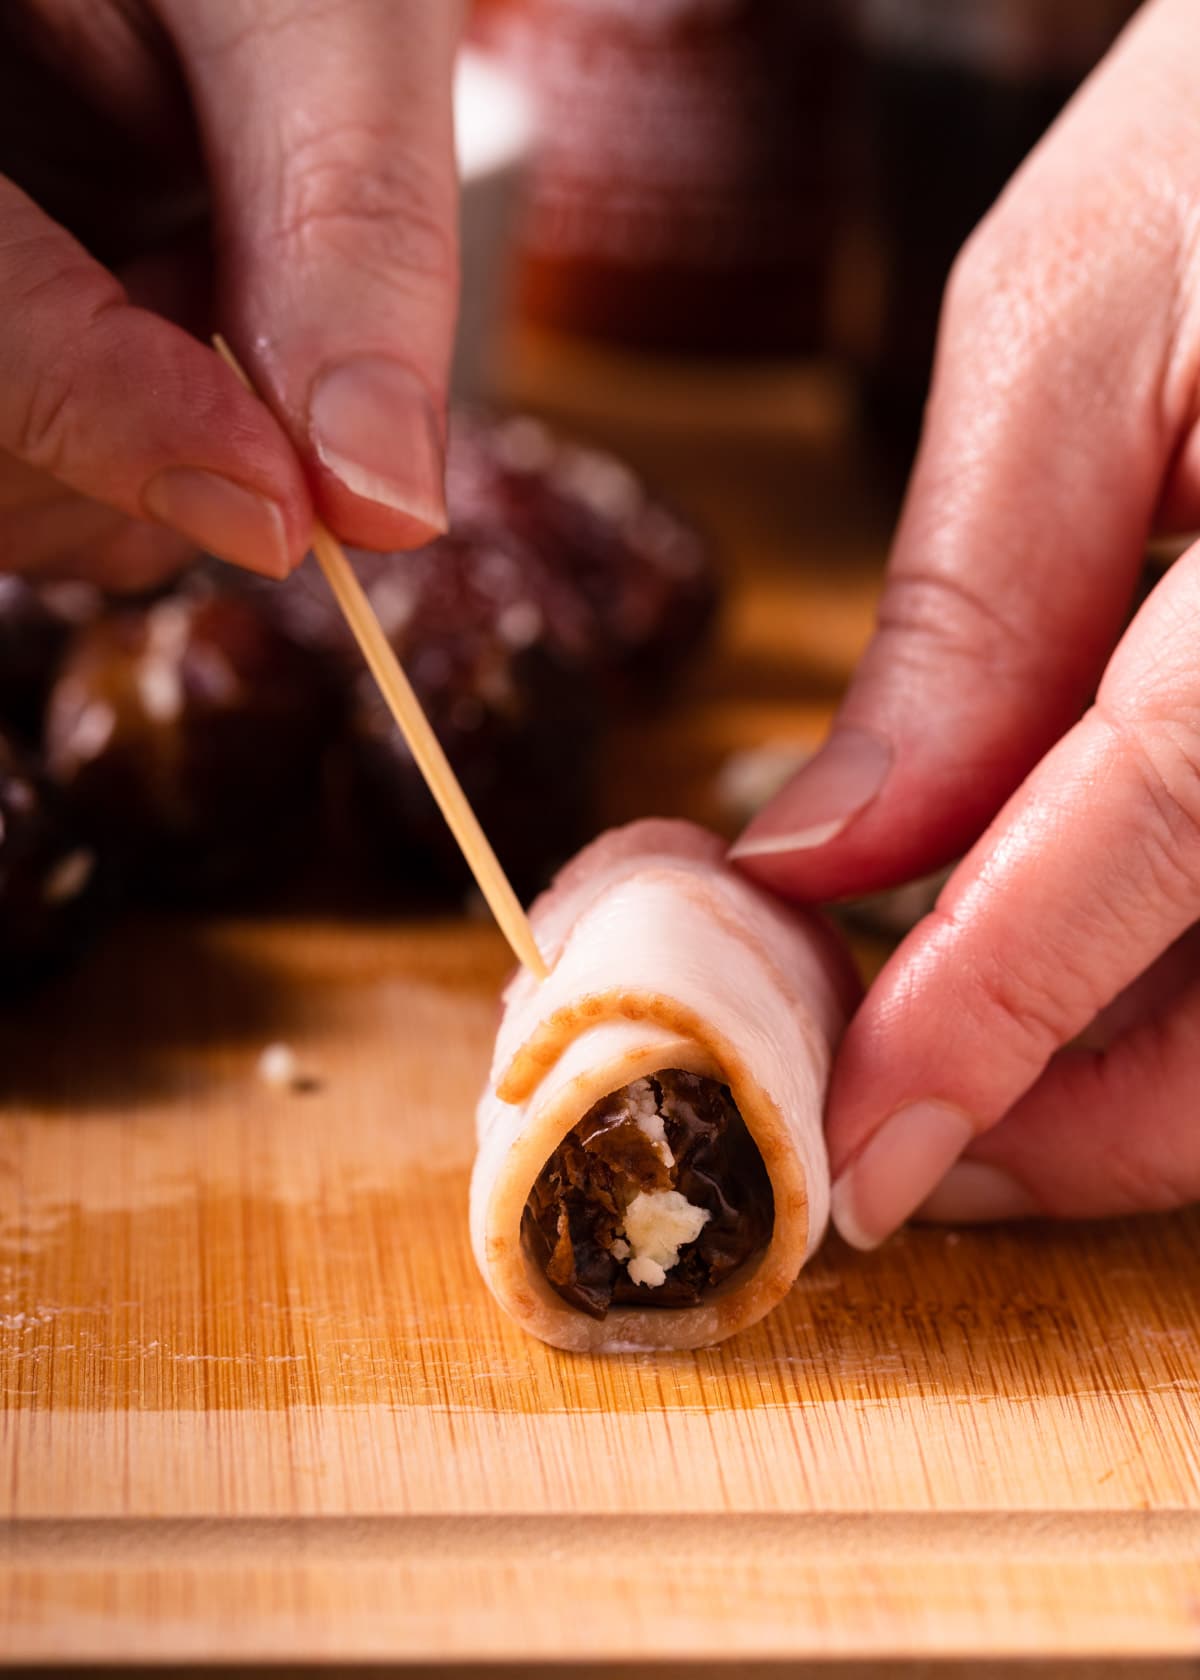 bacon wrapped date being skewered closed with a soaked toothpick